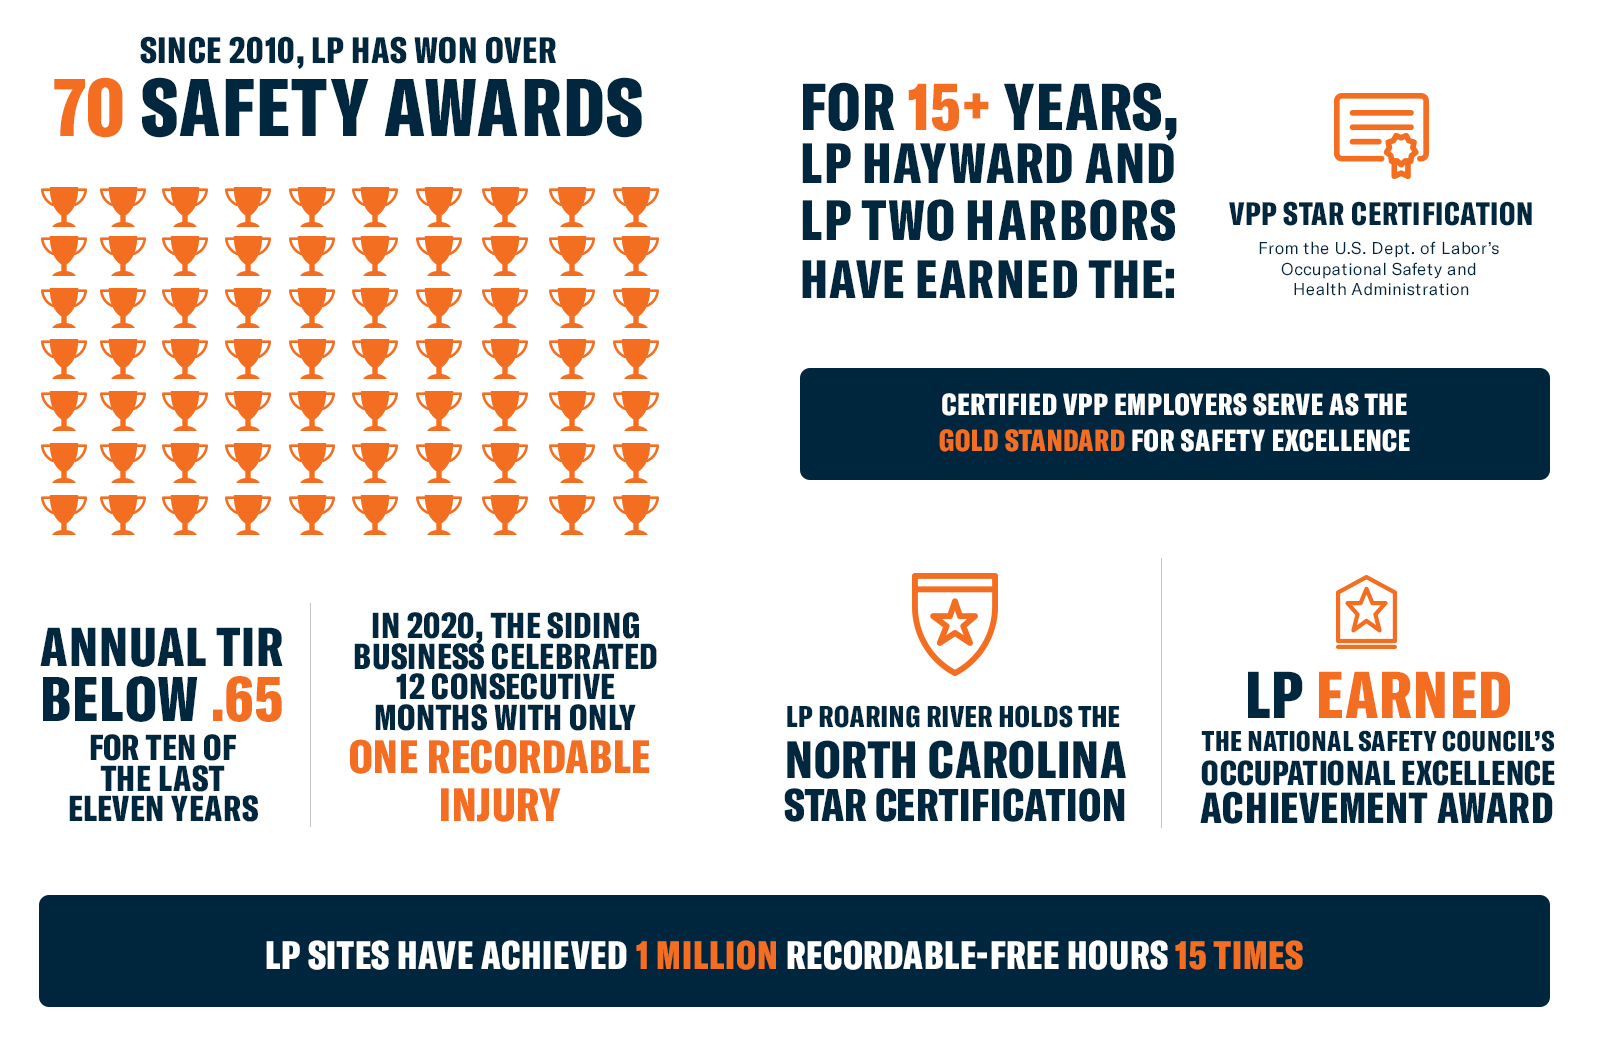 Infographic about safety awards and certifications LP has earned